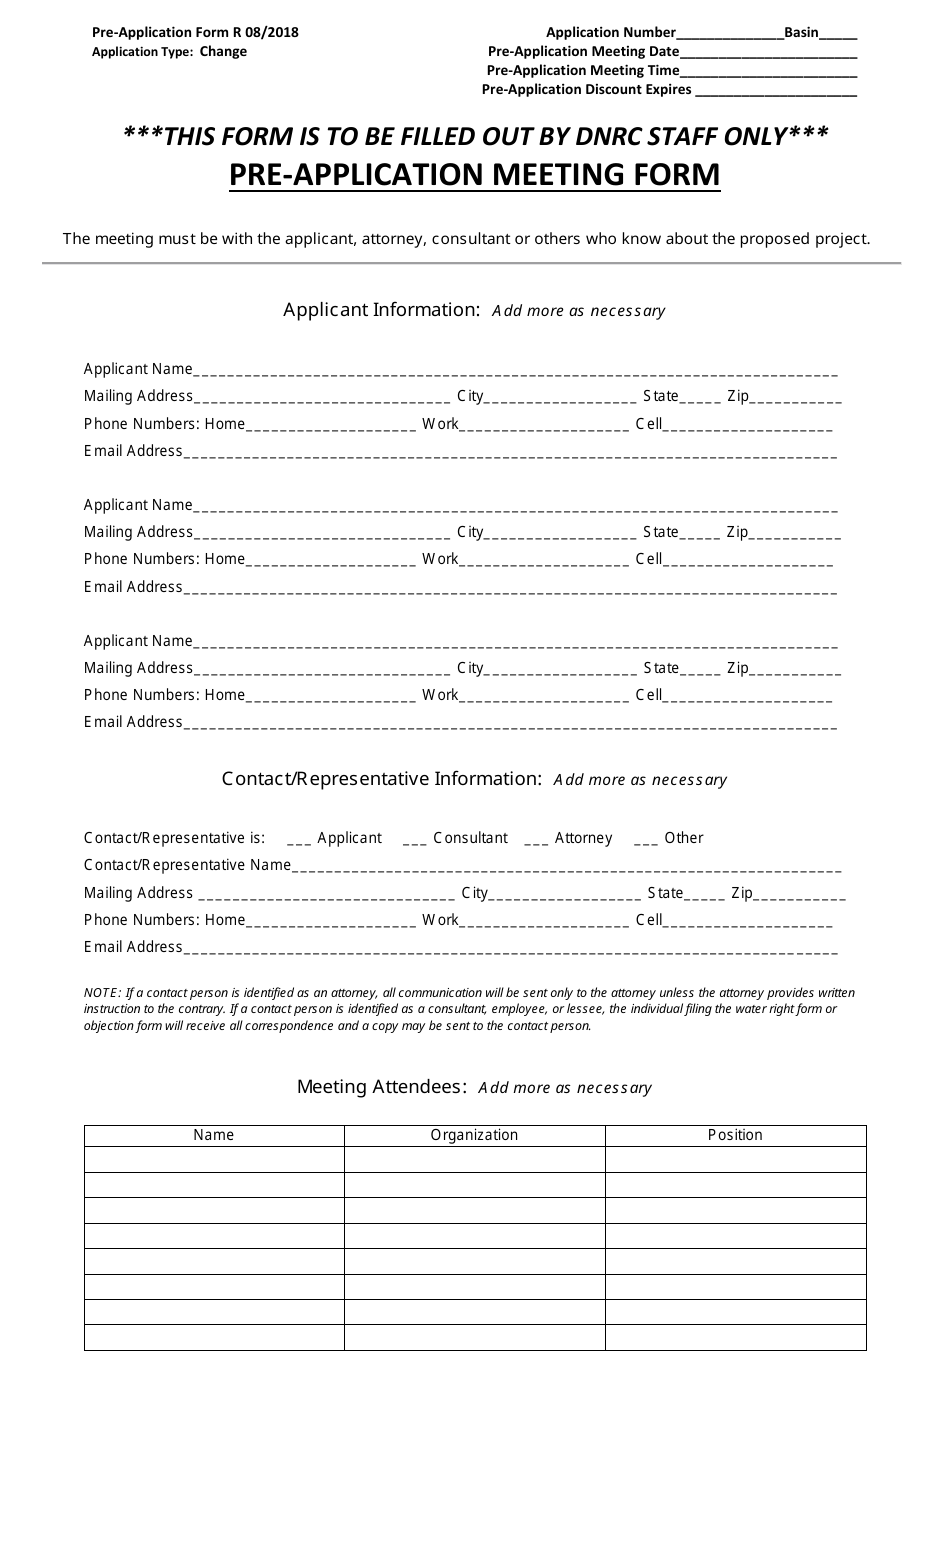 Pre-application Meeting Form - Change of Appropriation - Montana, Page 1